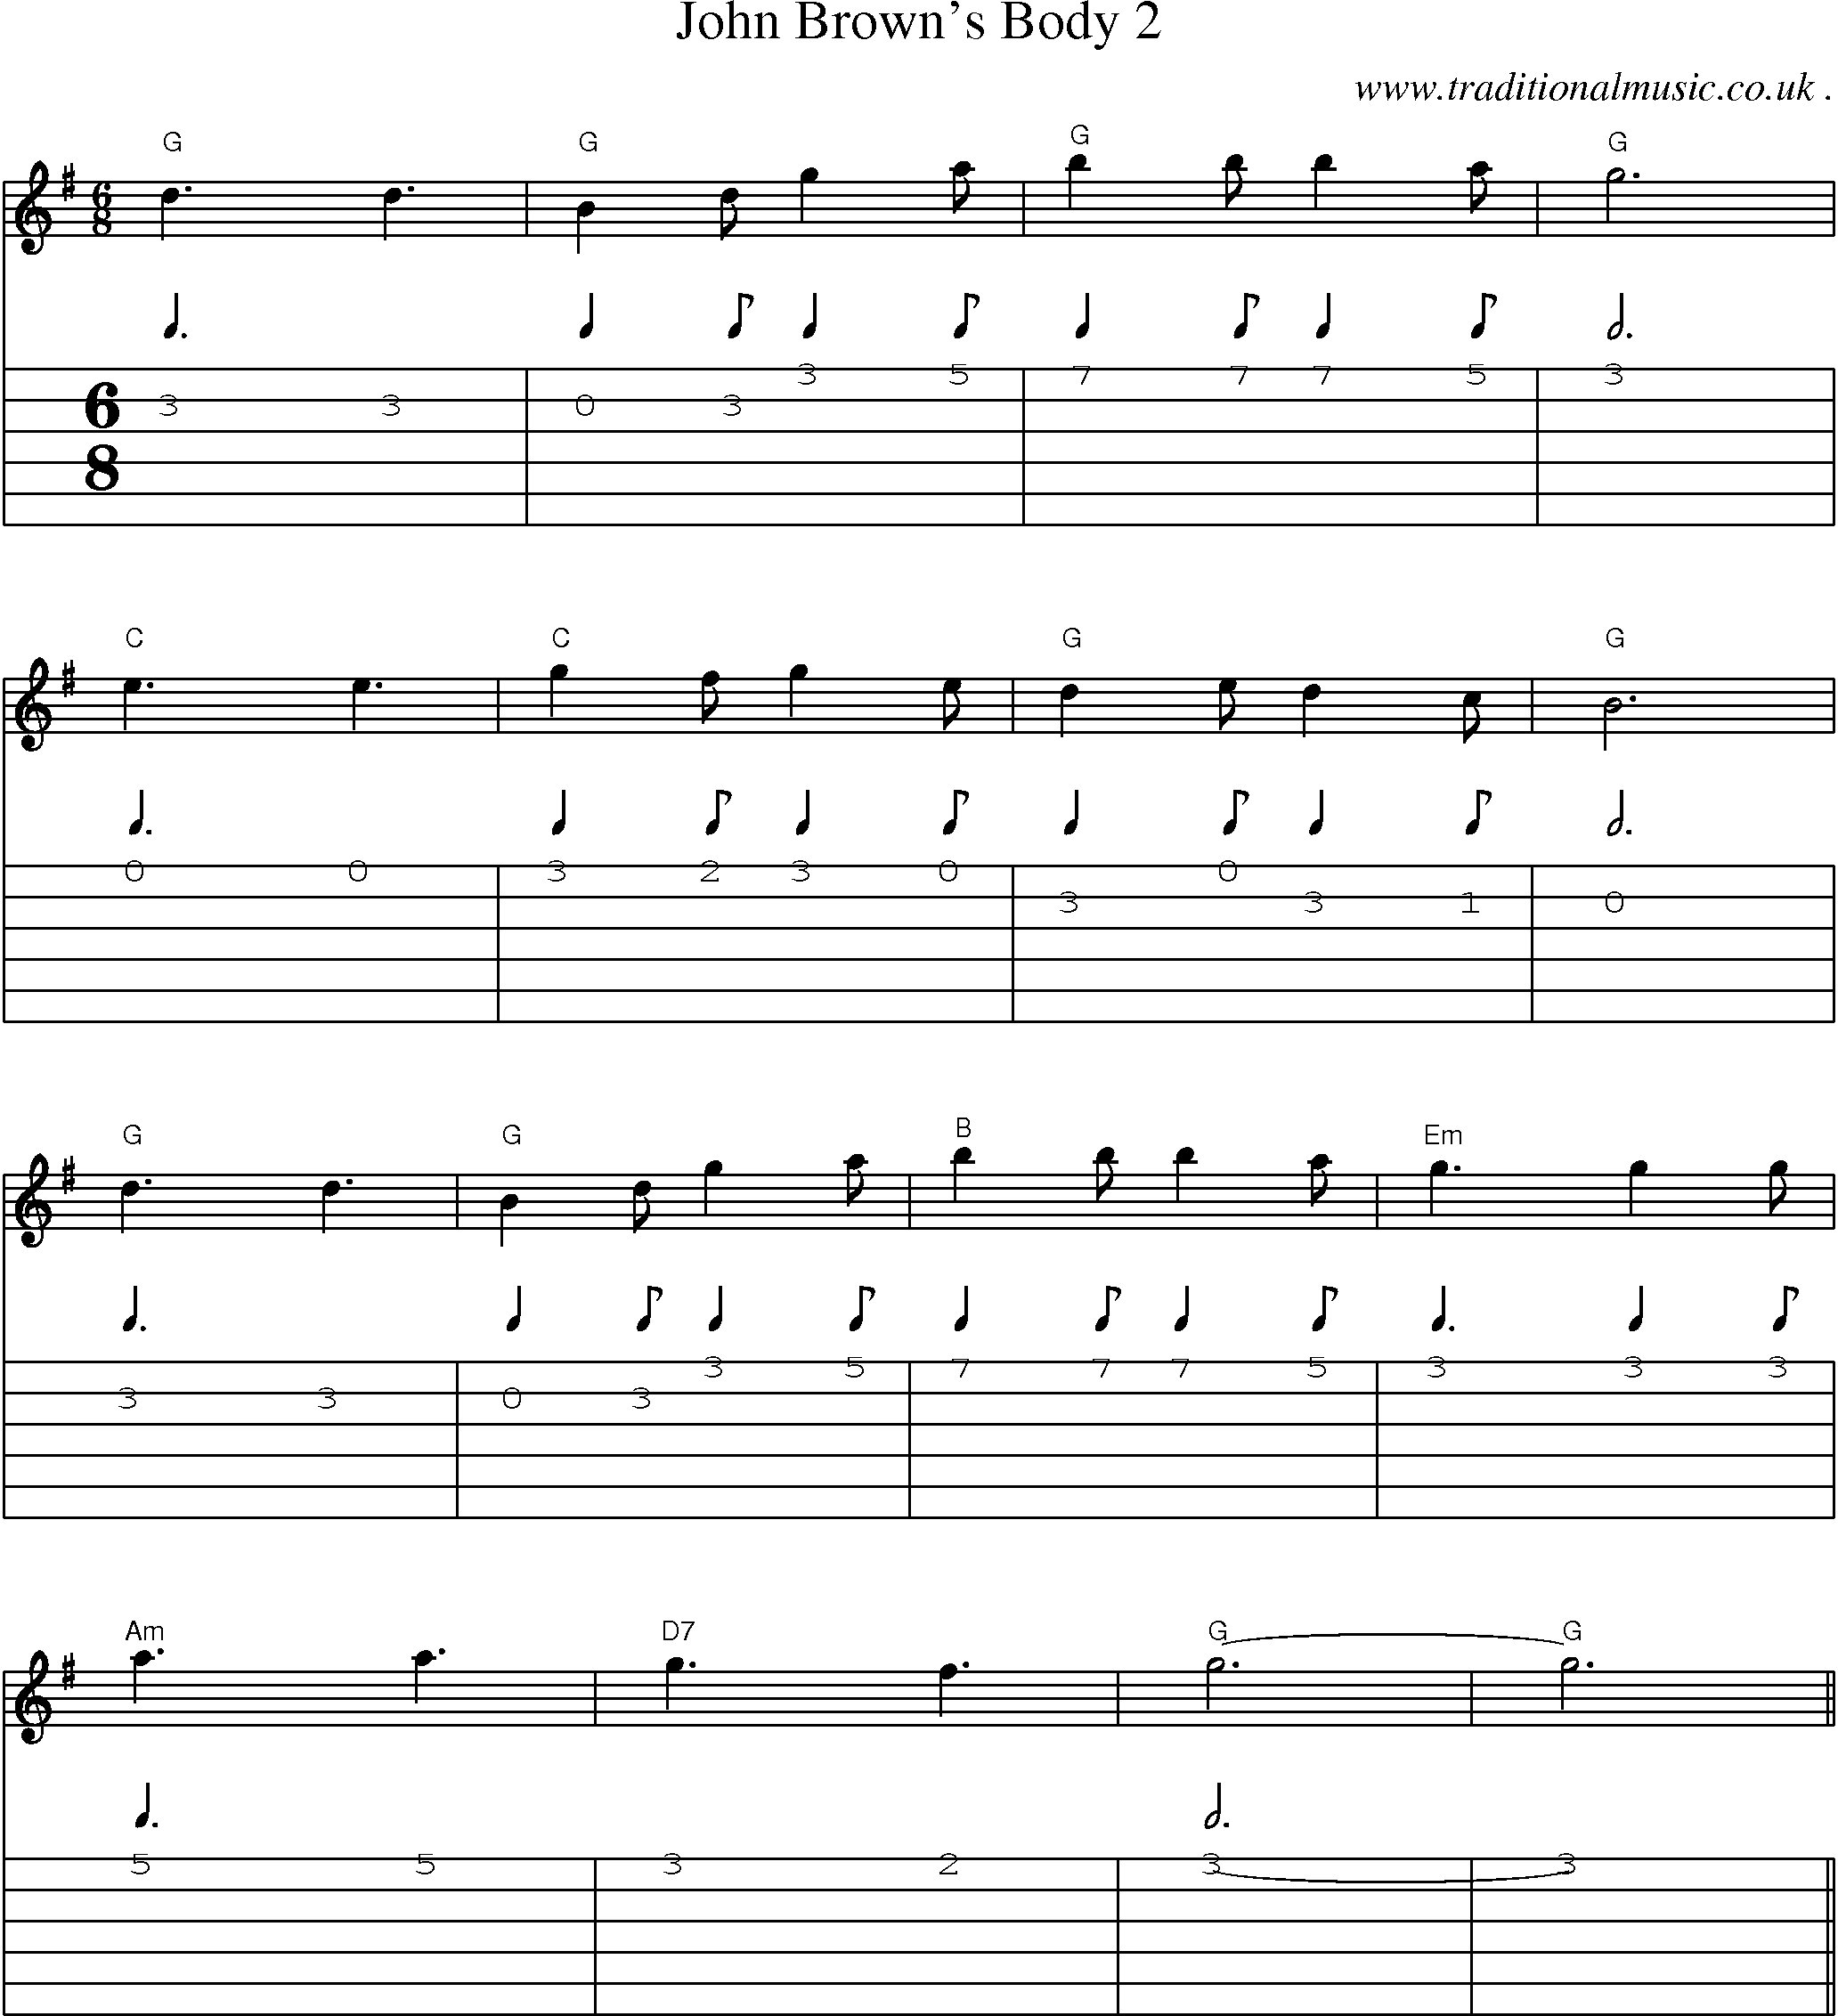 Music Score and Guitar Tabs for John Browns Body 2